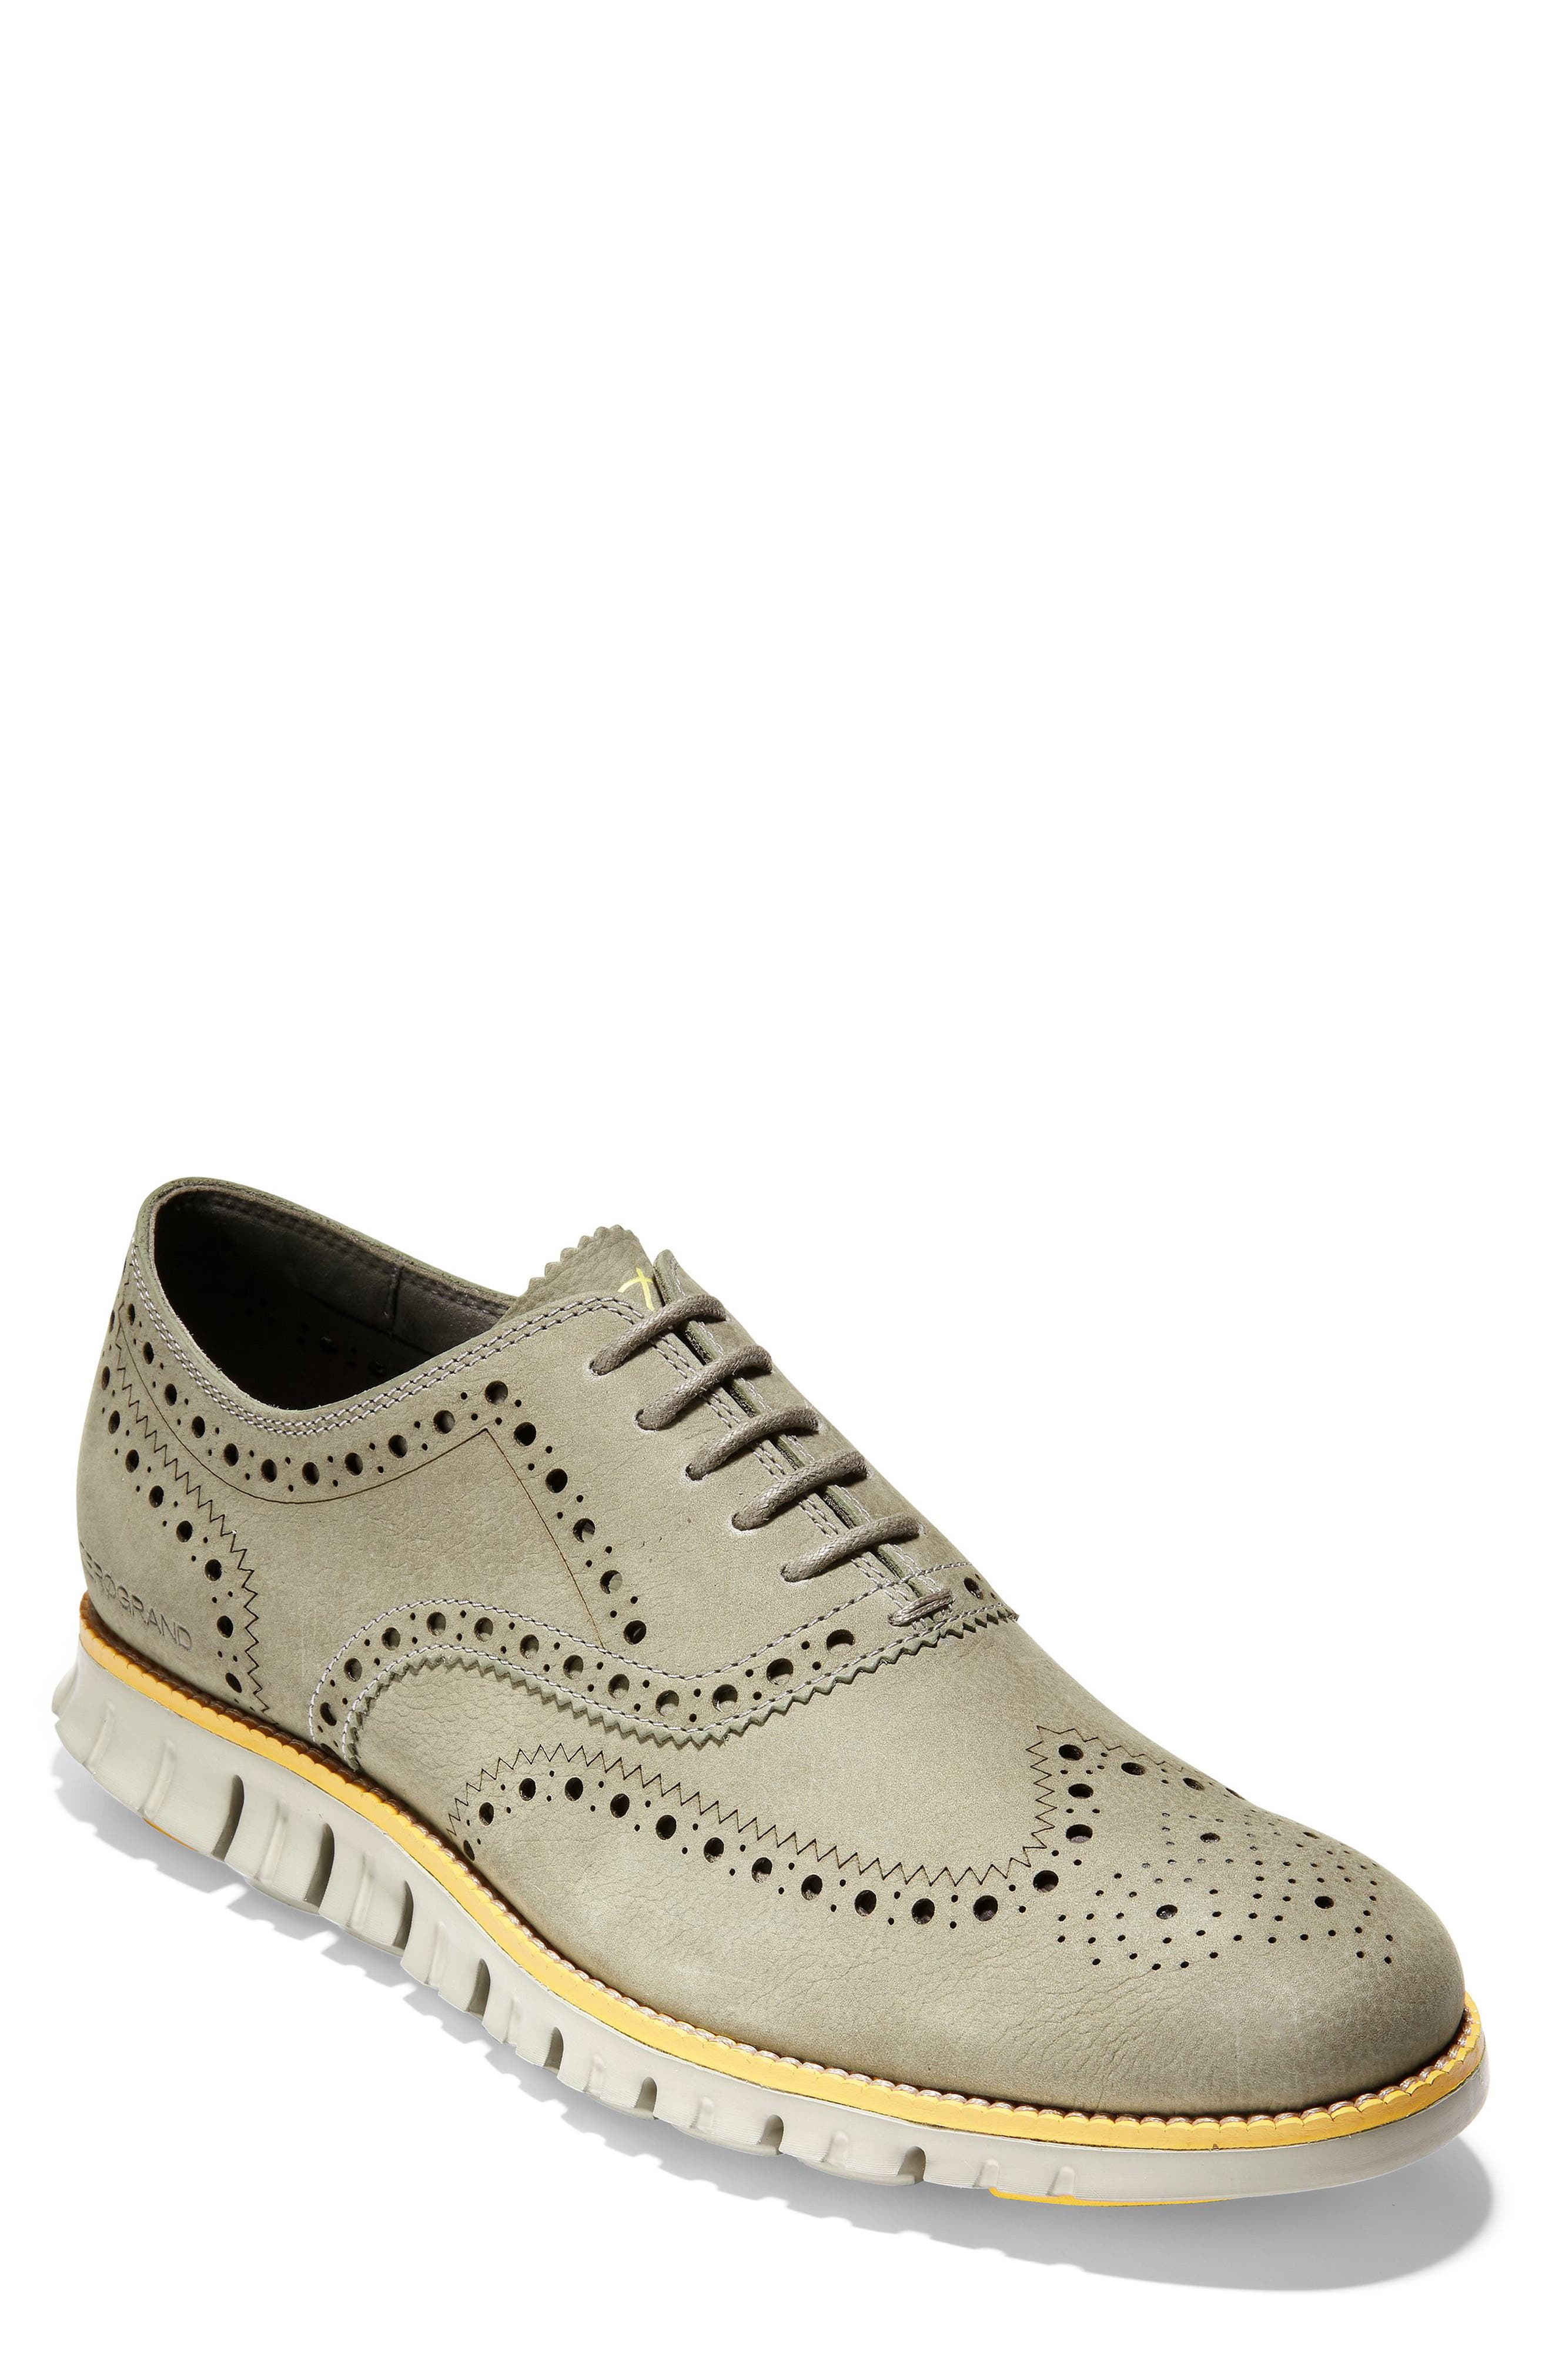 Cole Haan - Men's Casual Fashion Shoes and Sneakers